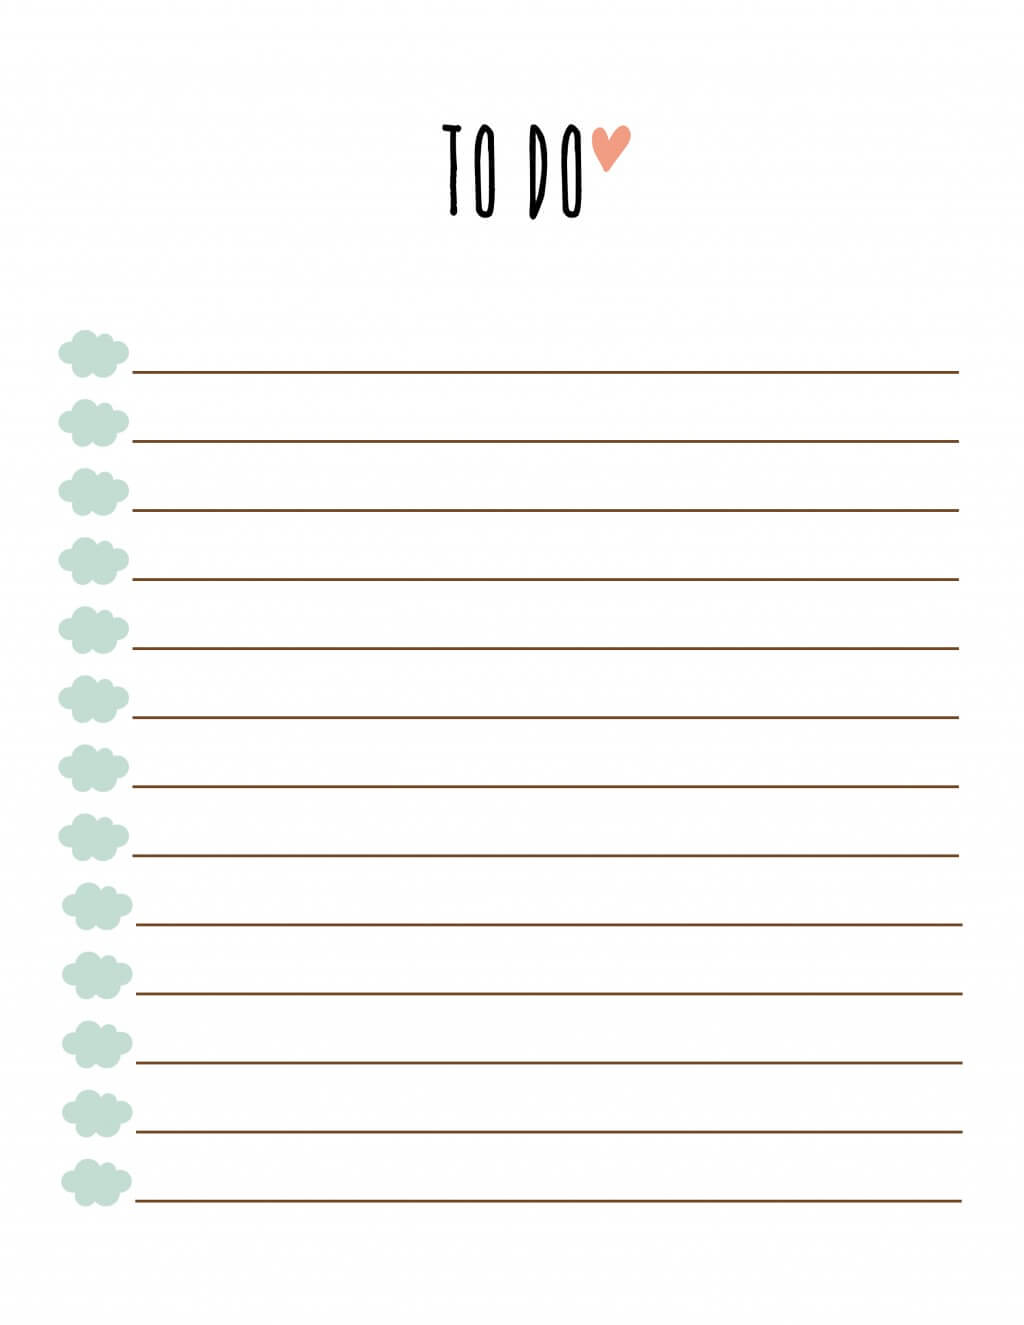 038 Weekly To Do List Template 3108X4020 Ideas Best For Blank To Do List Template